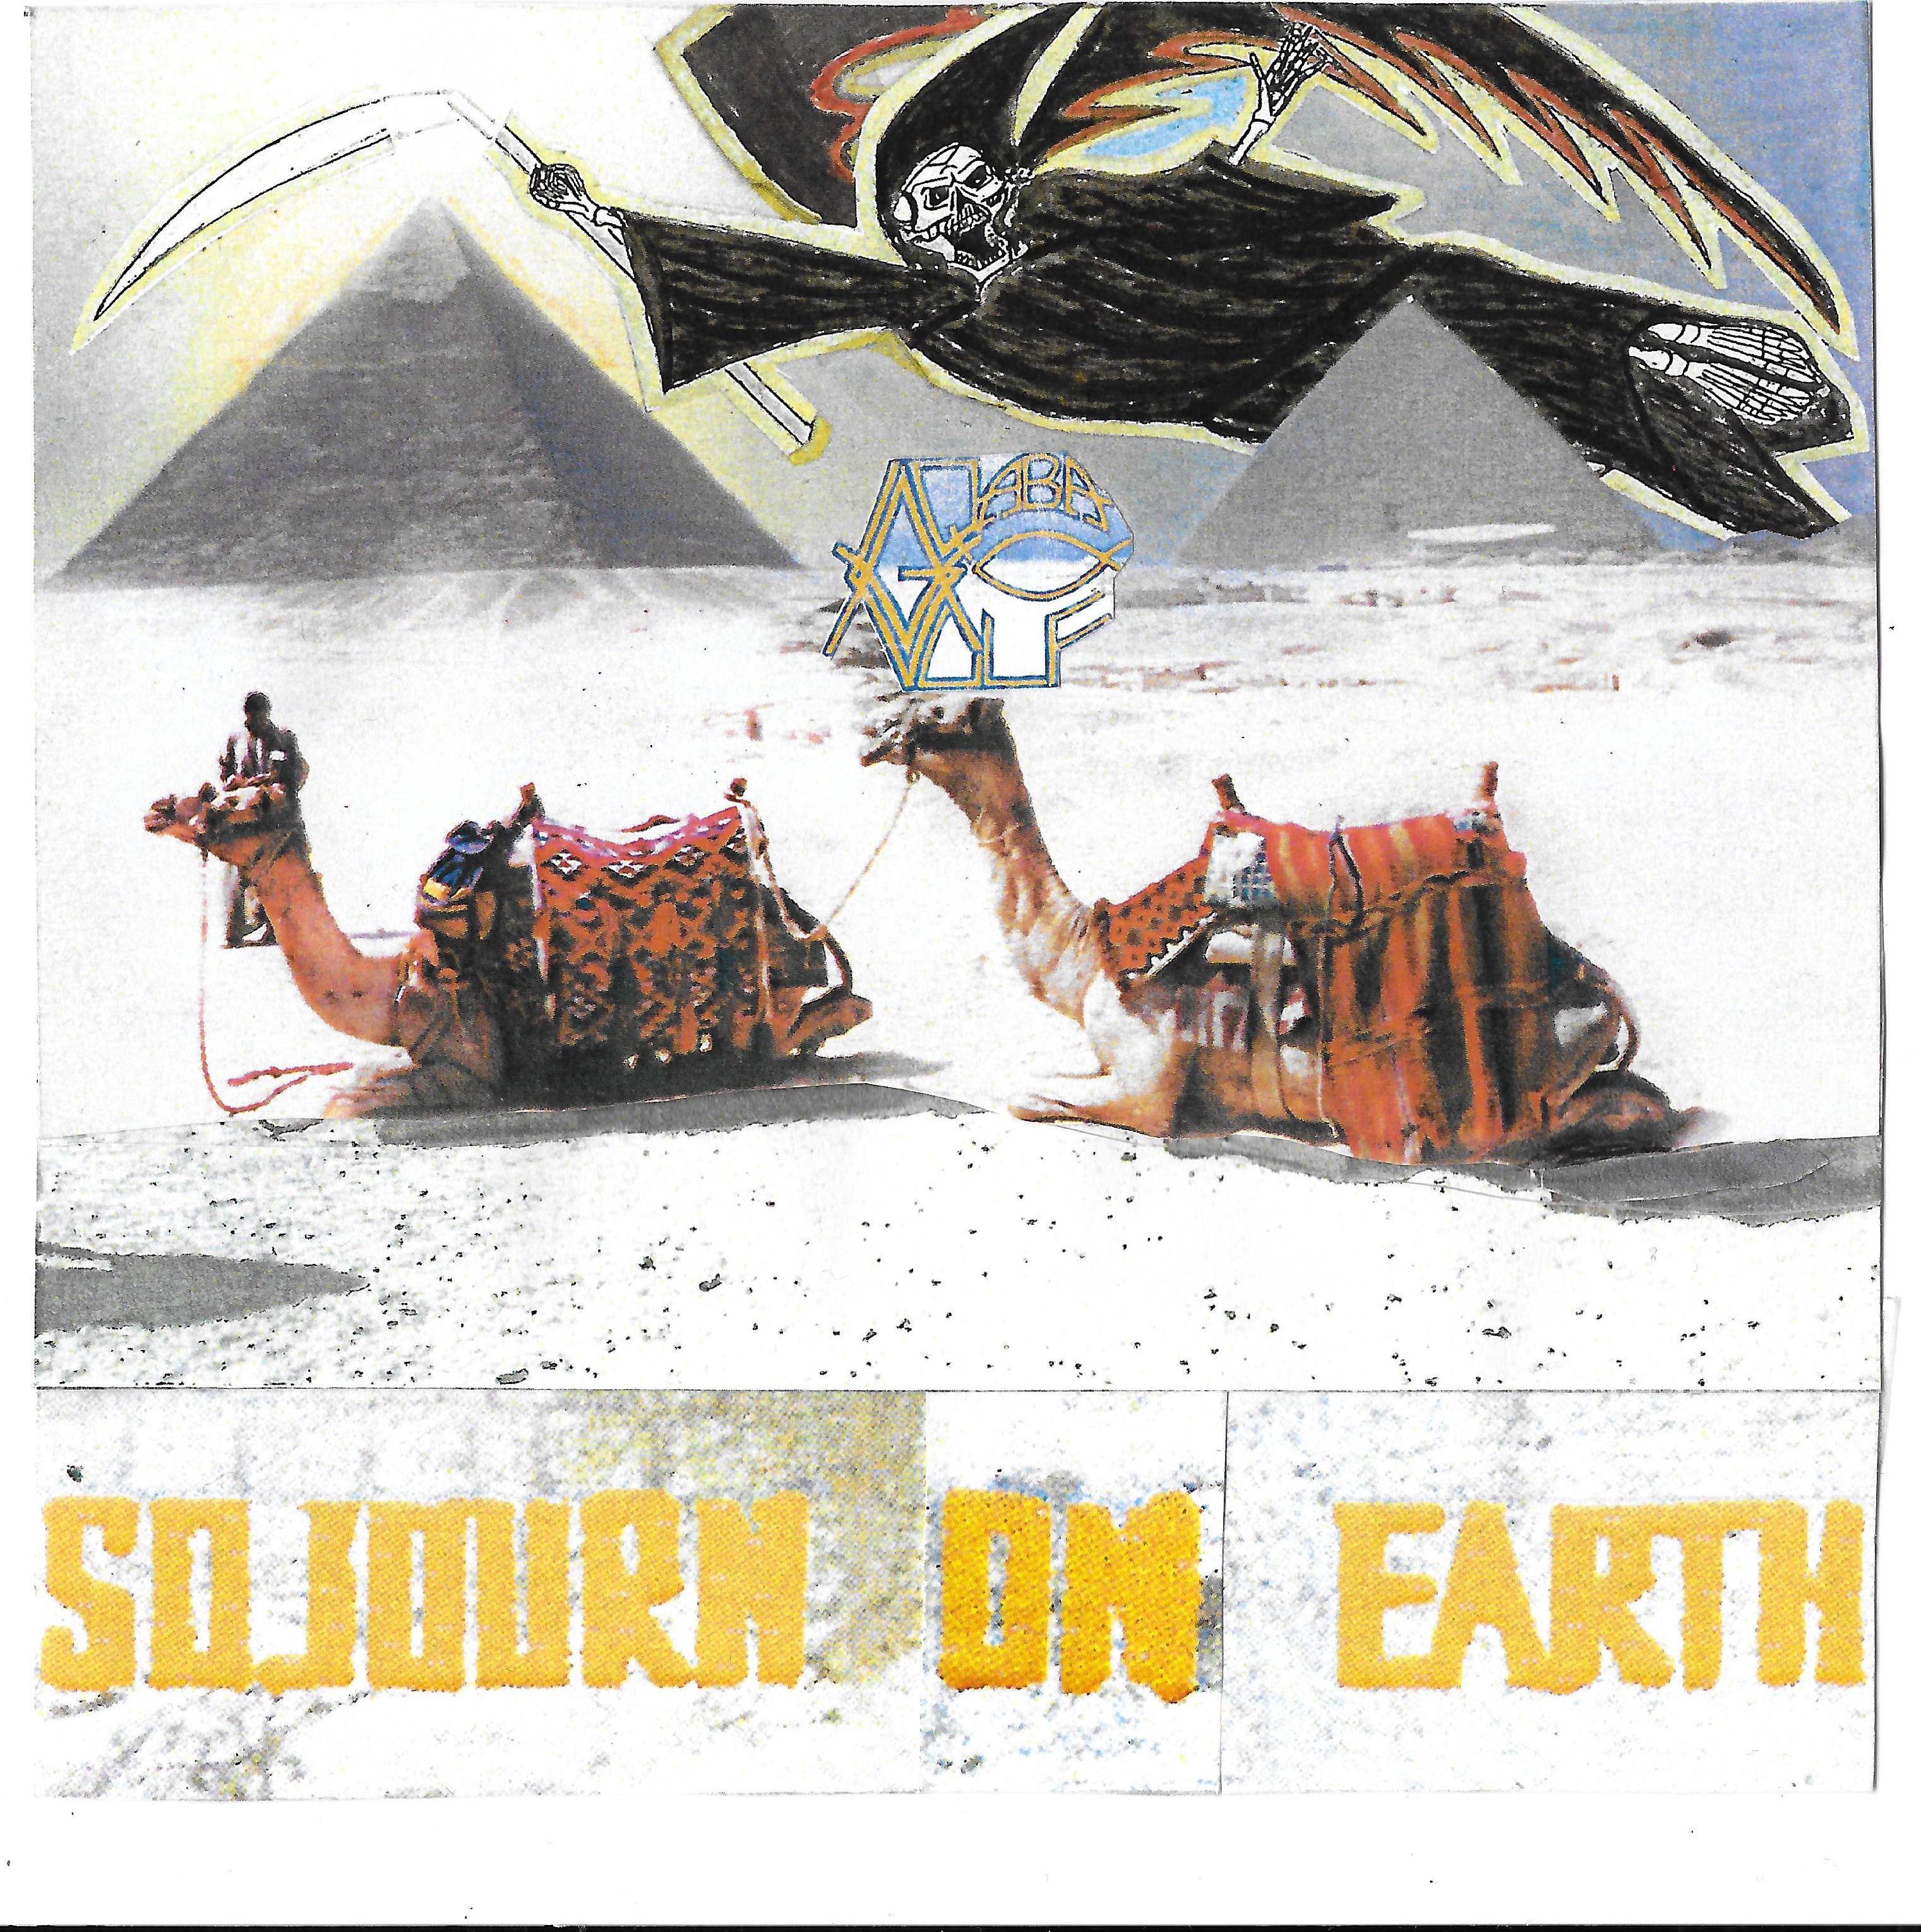 SOJOURN ON EARTH front cover artwork